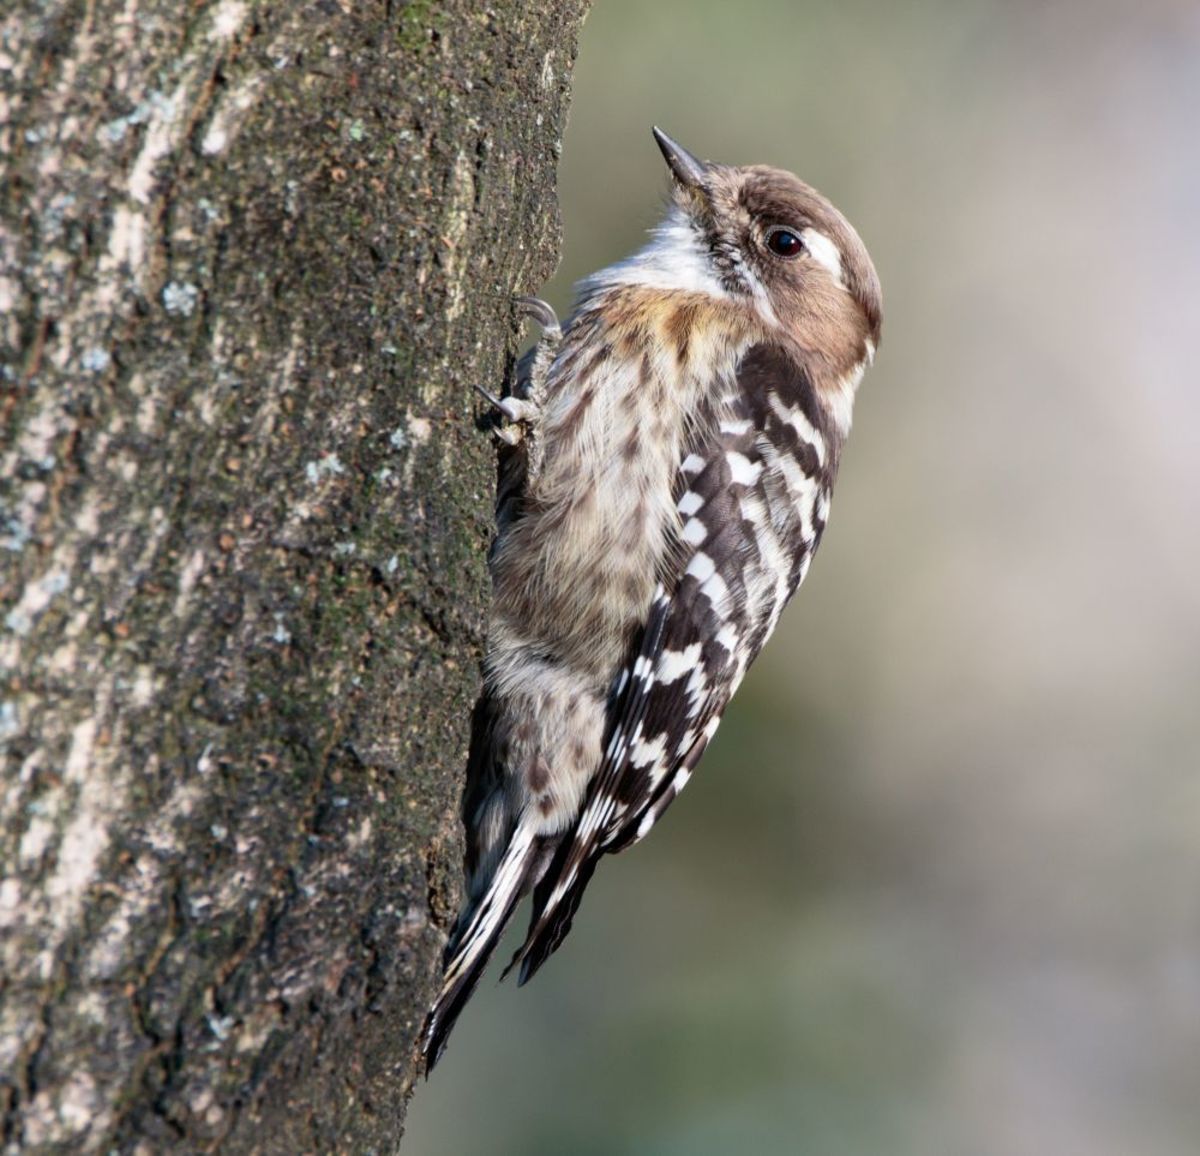 the-lives-of-woodpeckers-birds-that-keep-insects-under-control